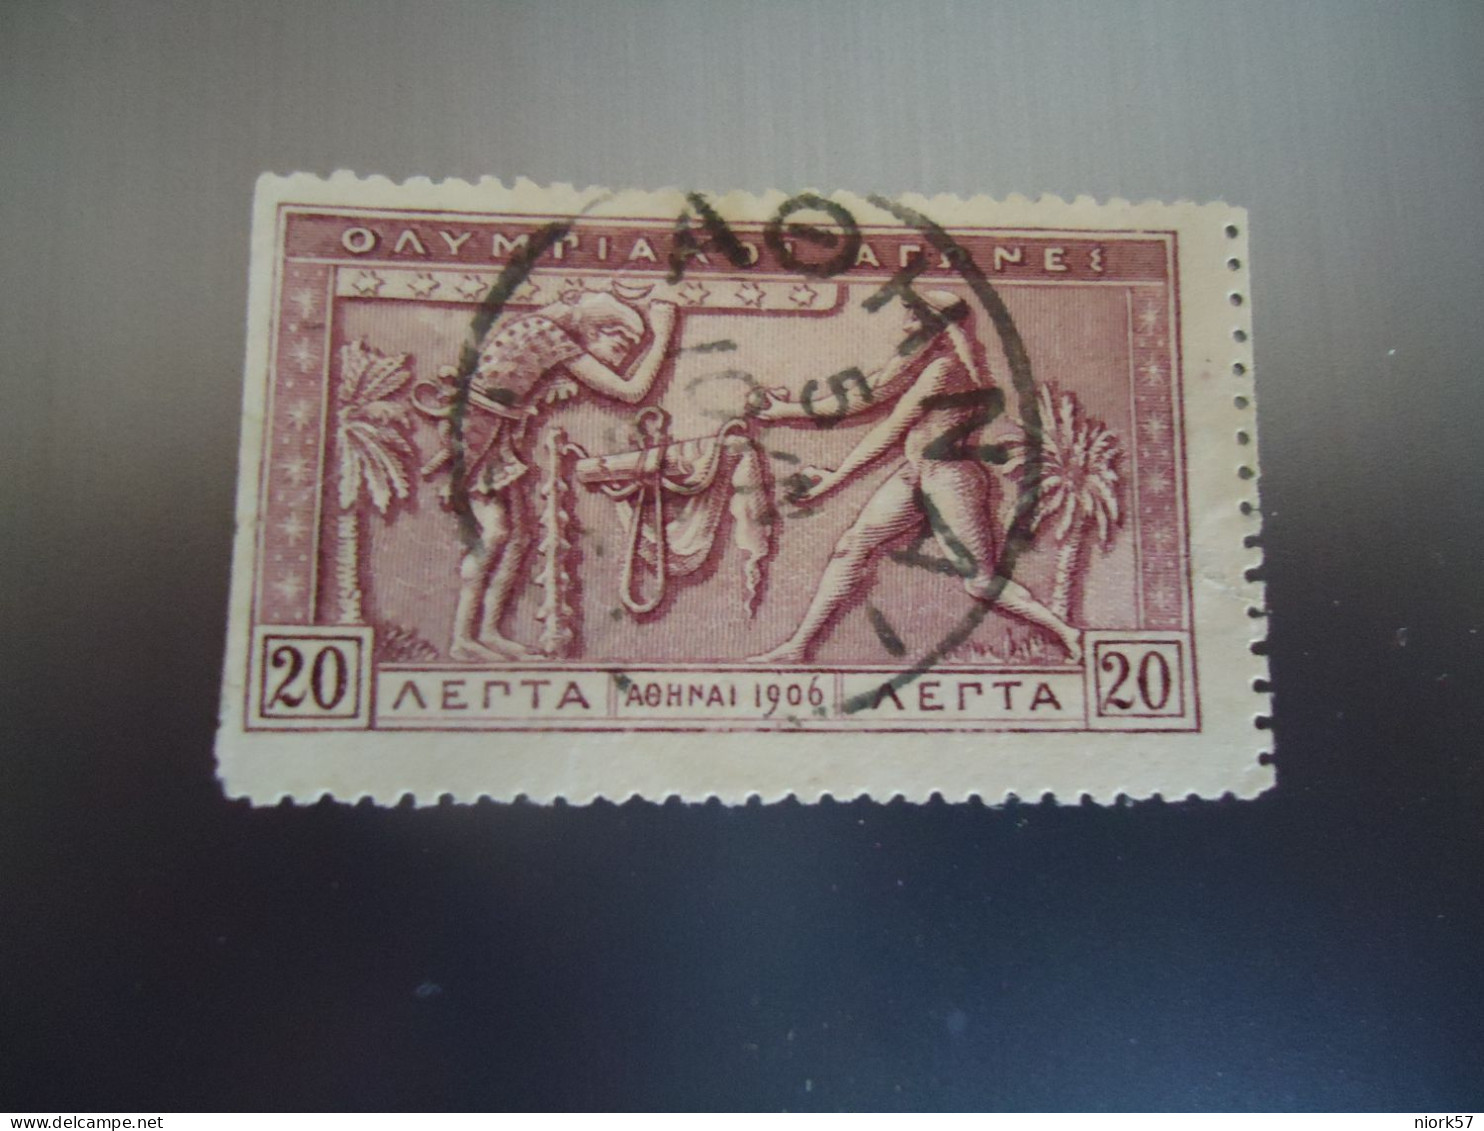 GREECE USED STAMPS OLYMPIC GAMES 1906   POSΤMARK  ΑΘΗΝΑ - Affrancature Meccaniche Rosse (EMA)